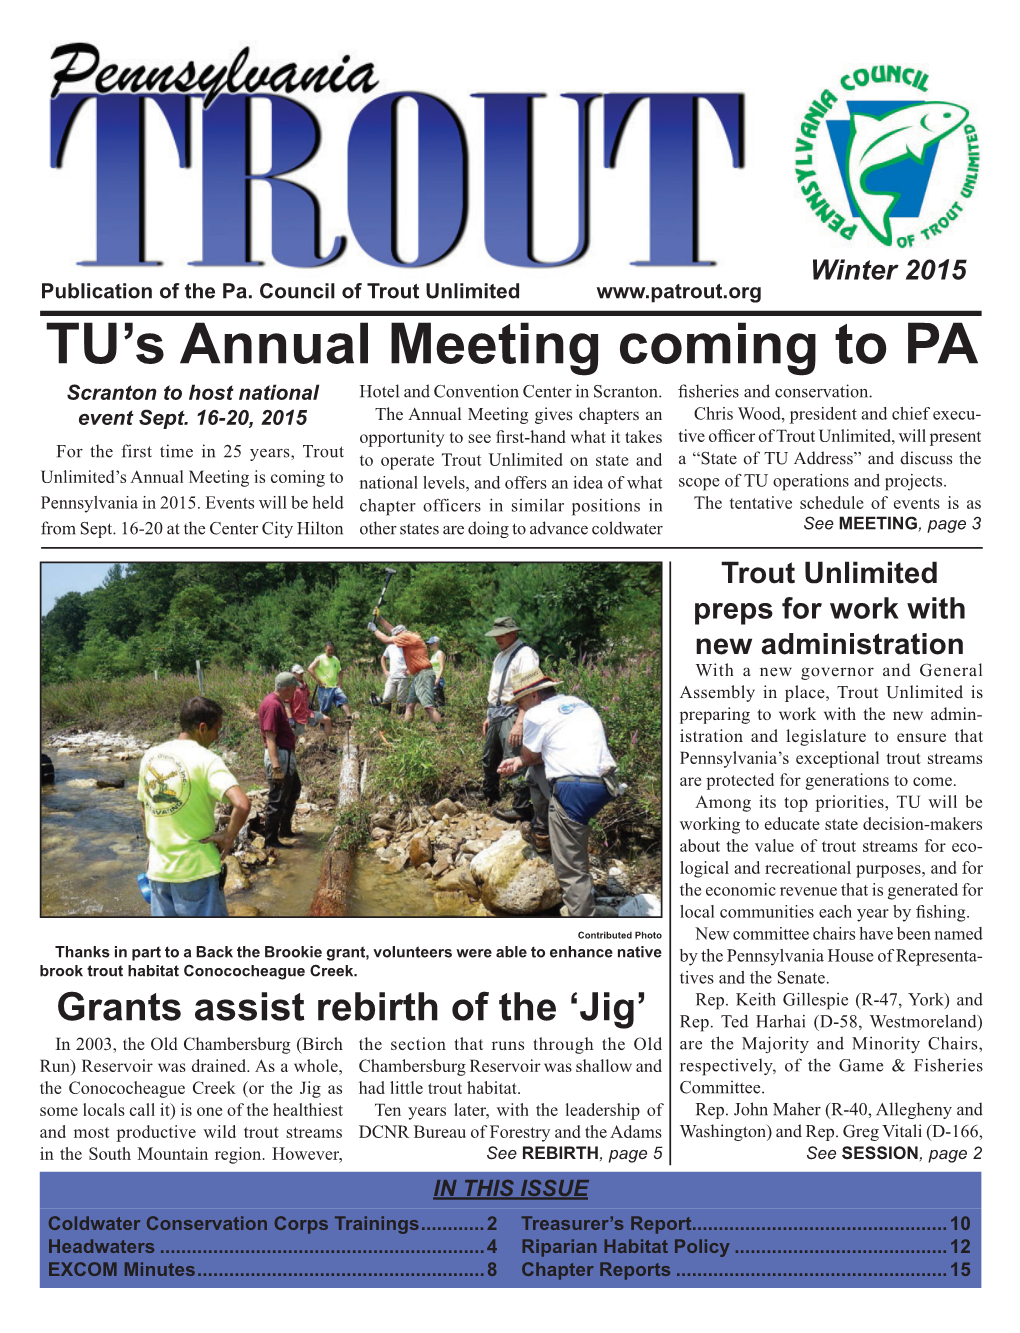 TU's Annual Meeting Coming to PA